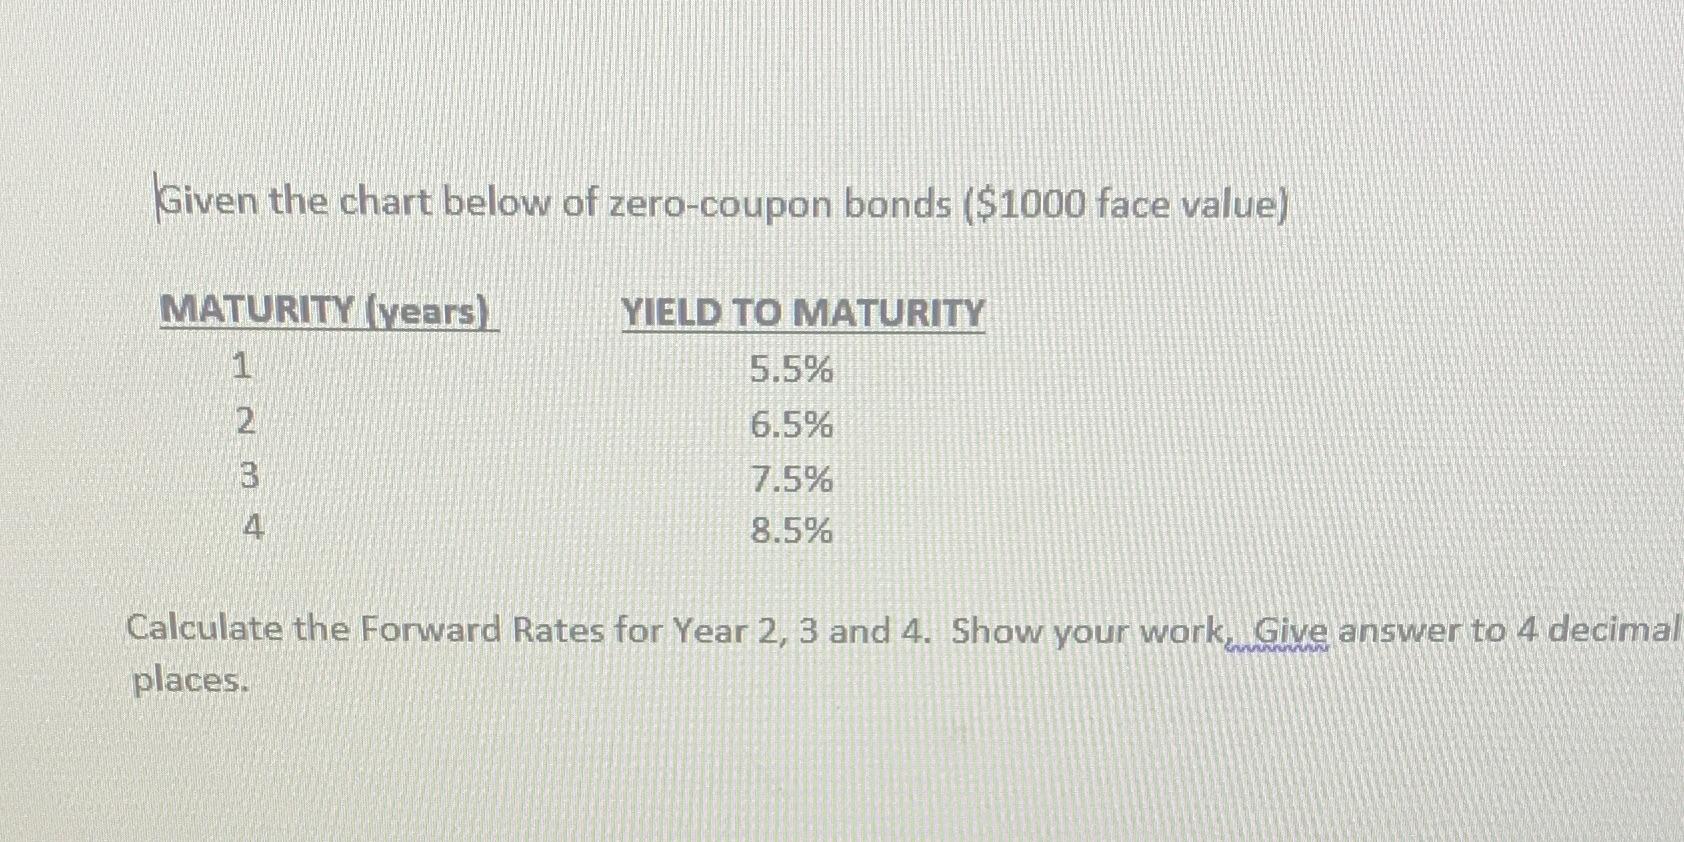 Given the chart below of zero-coupon bonds ($1000 face value) MATURITY (years) 2 3 4 YIELD TO MATURITY 5.5%